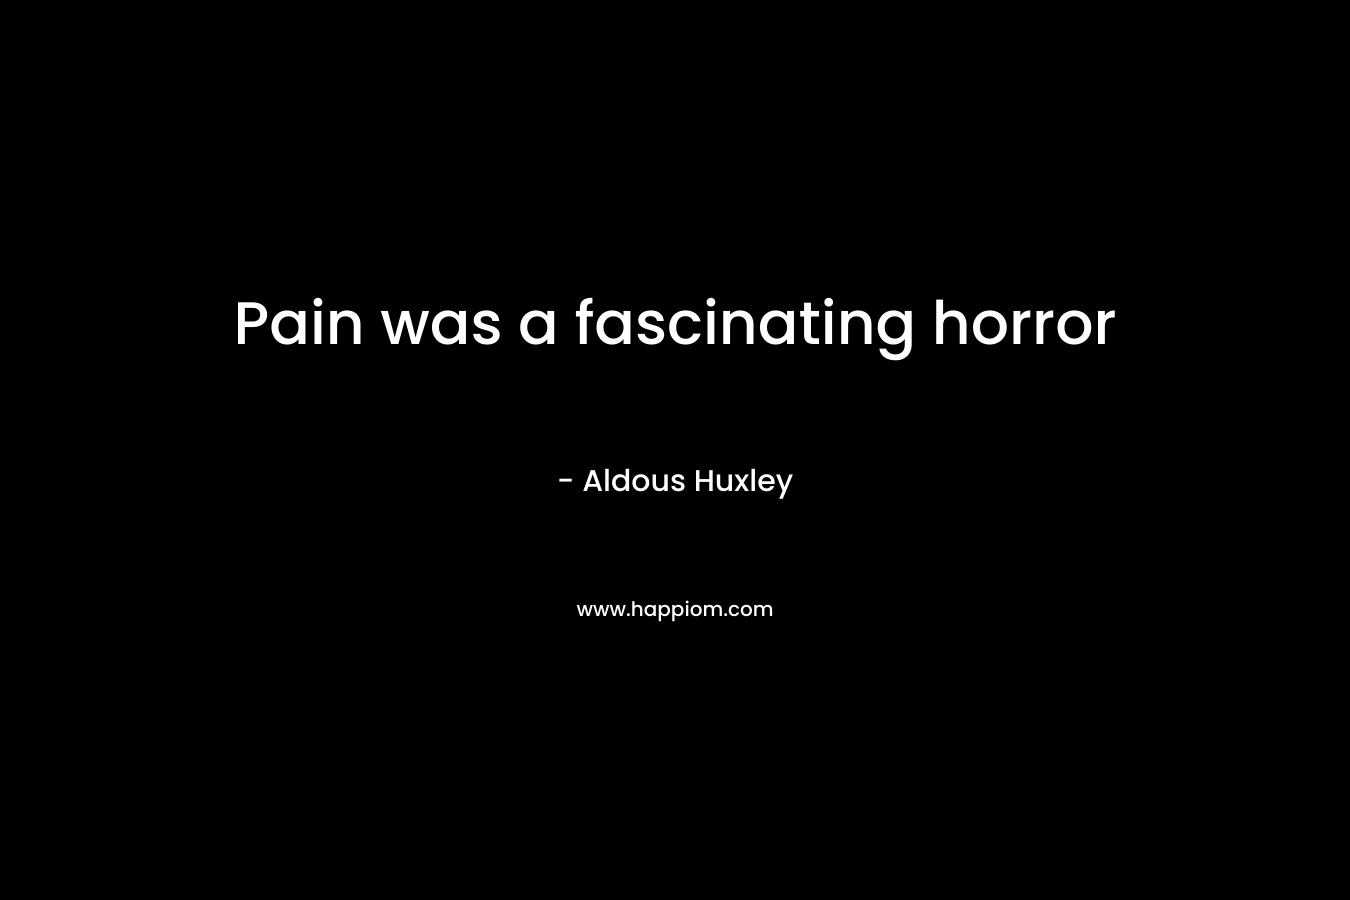 Pain was a fascinating horror